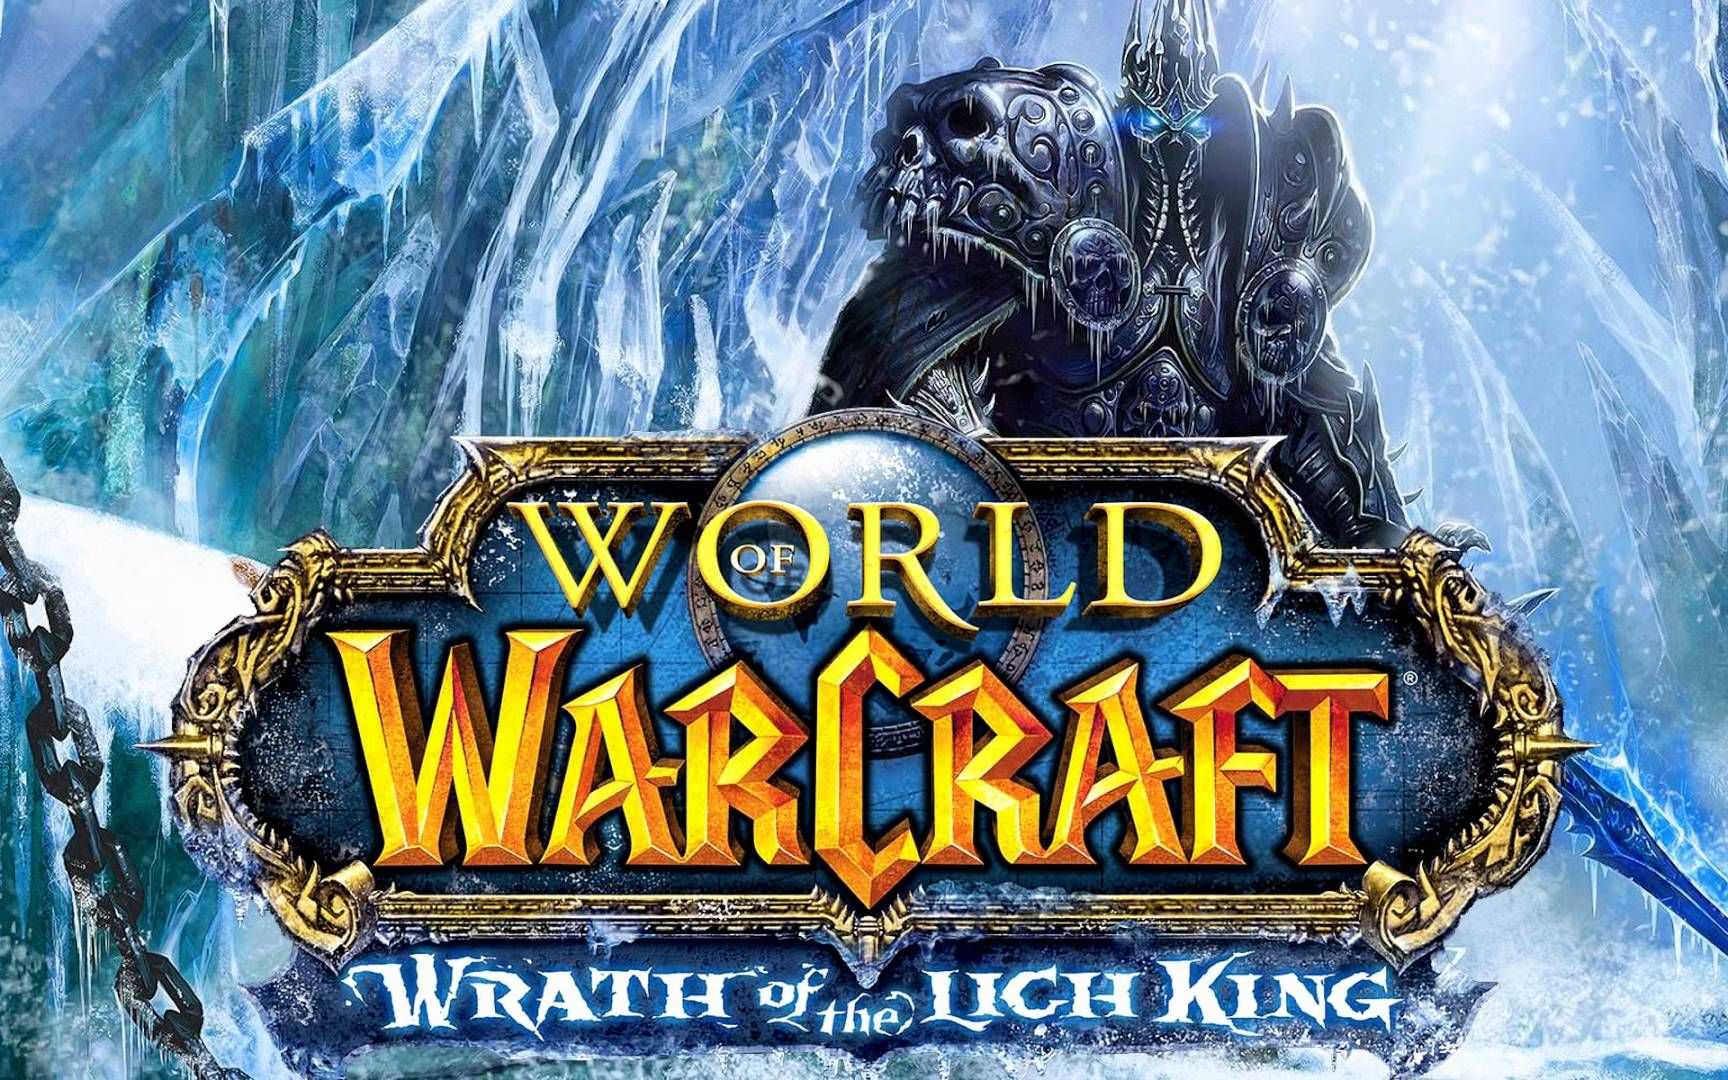 World of Warcraft: Wrath of the Lich King - Трейлер ( Русский Дубляж)